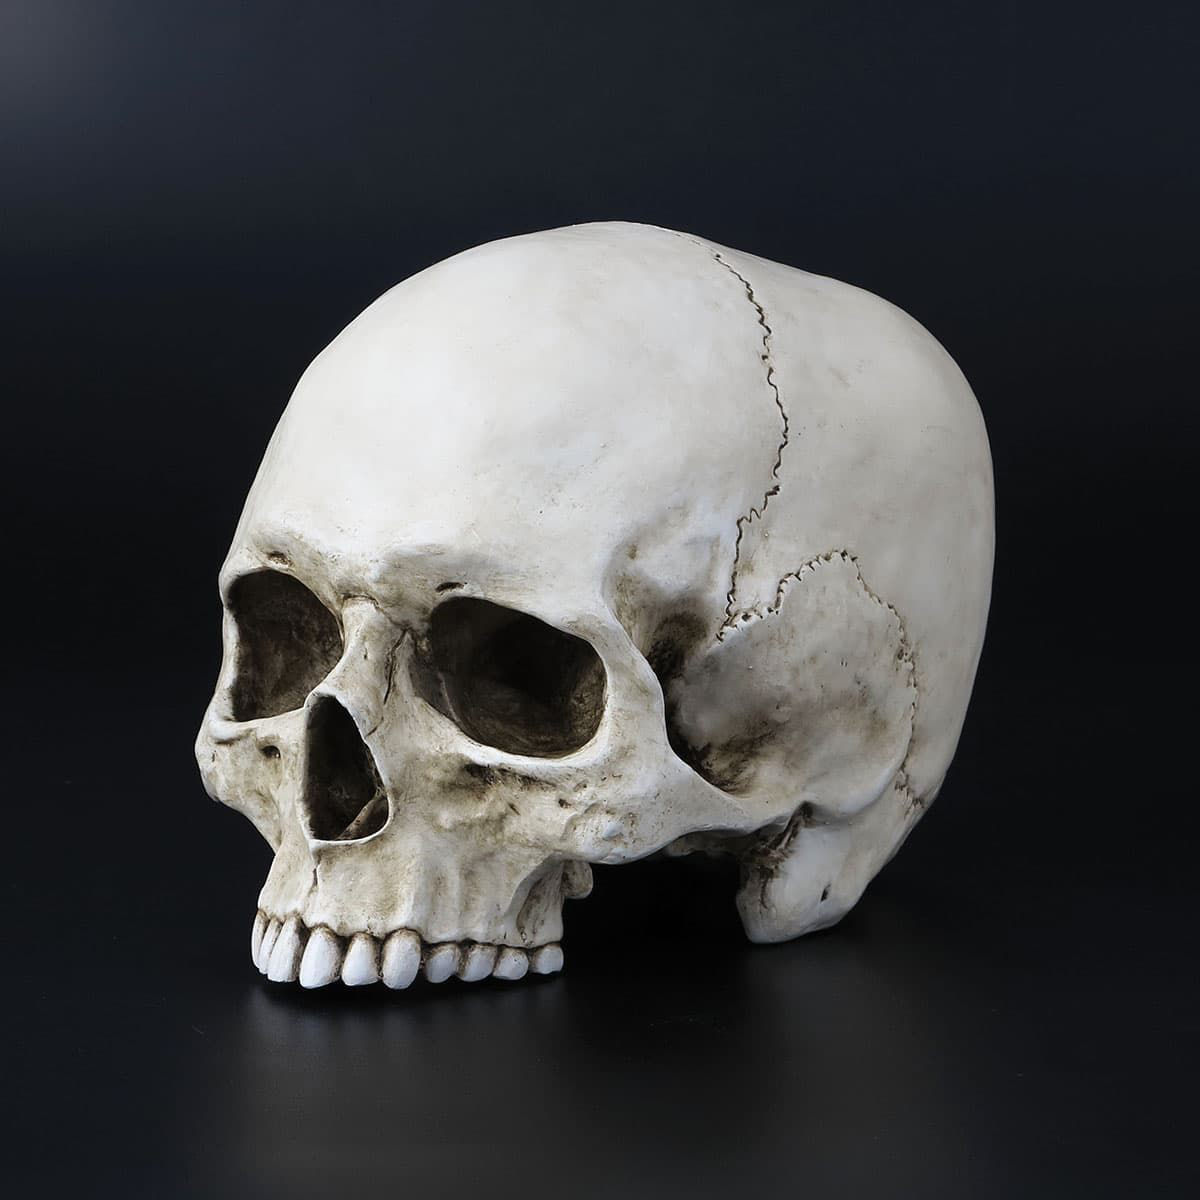 life-size resin skull is jawless and finished to look like real aged bone